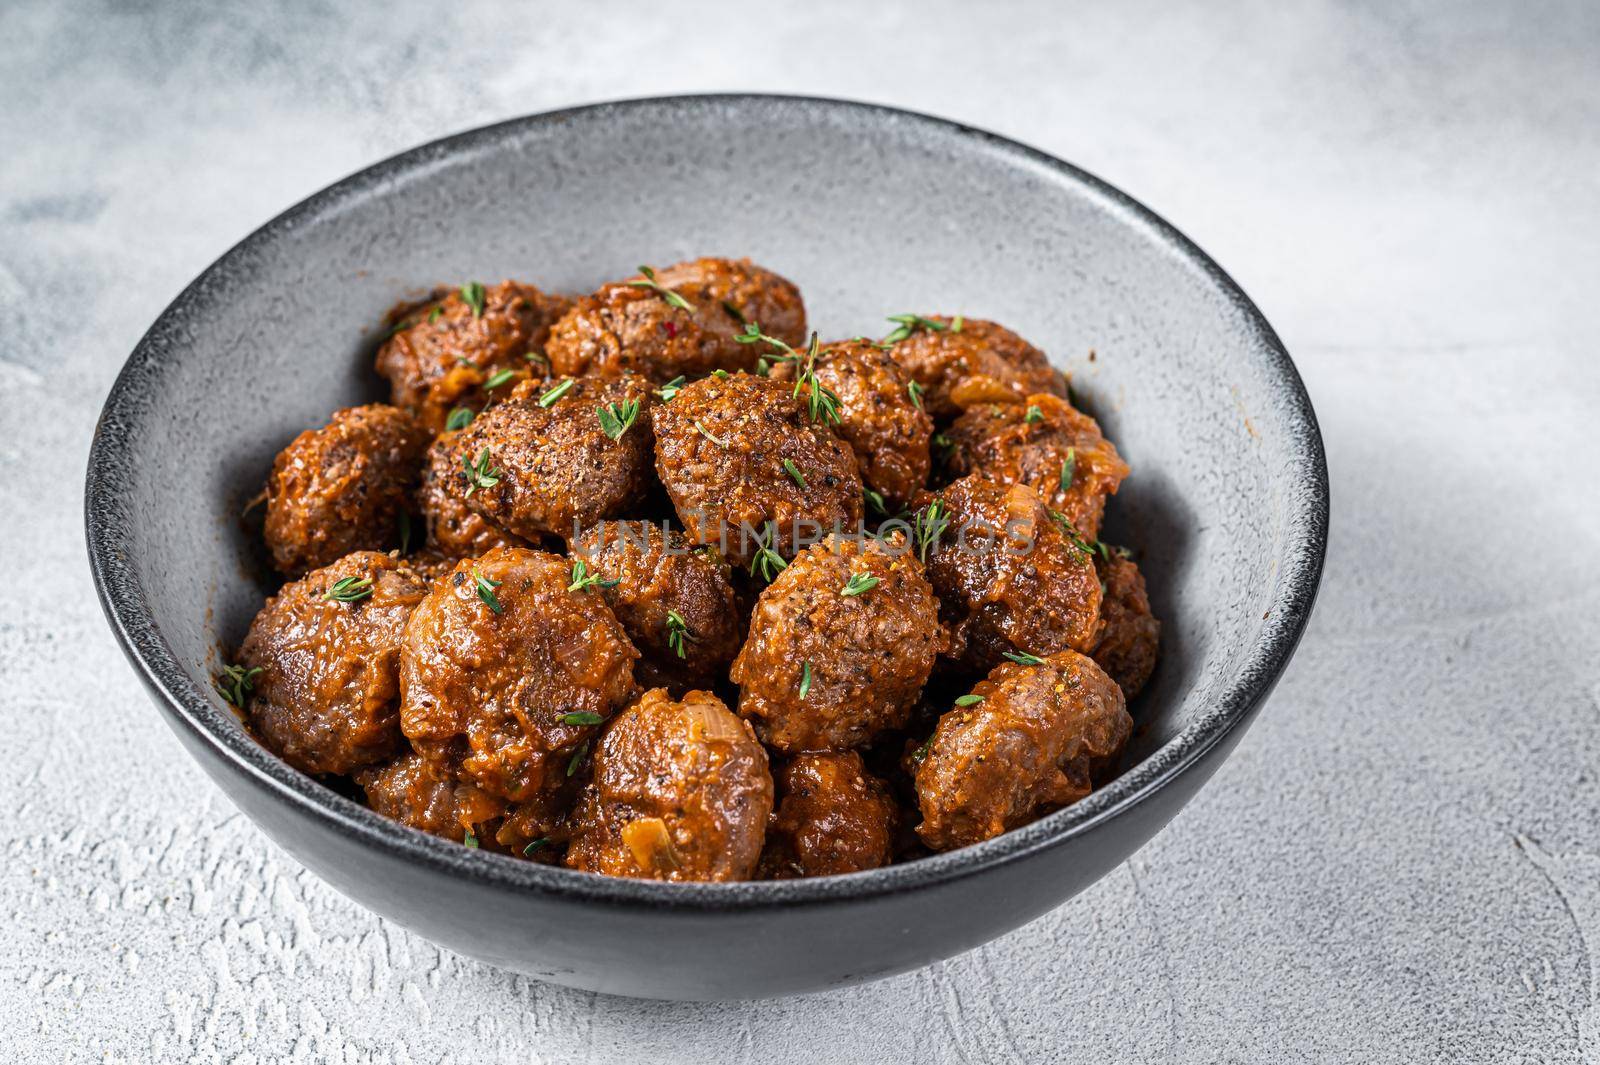 Fried Meatballs in tomato sauce from ground beef and pork meat. White background. Top view by Composter